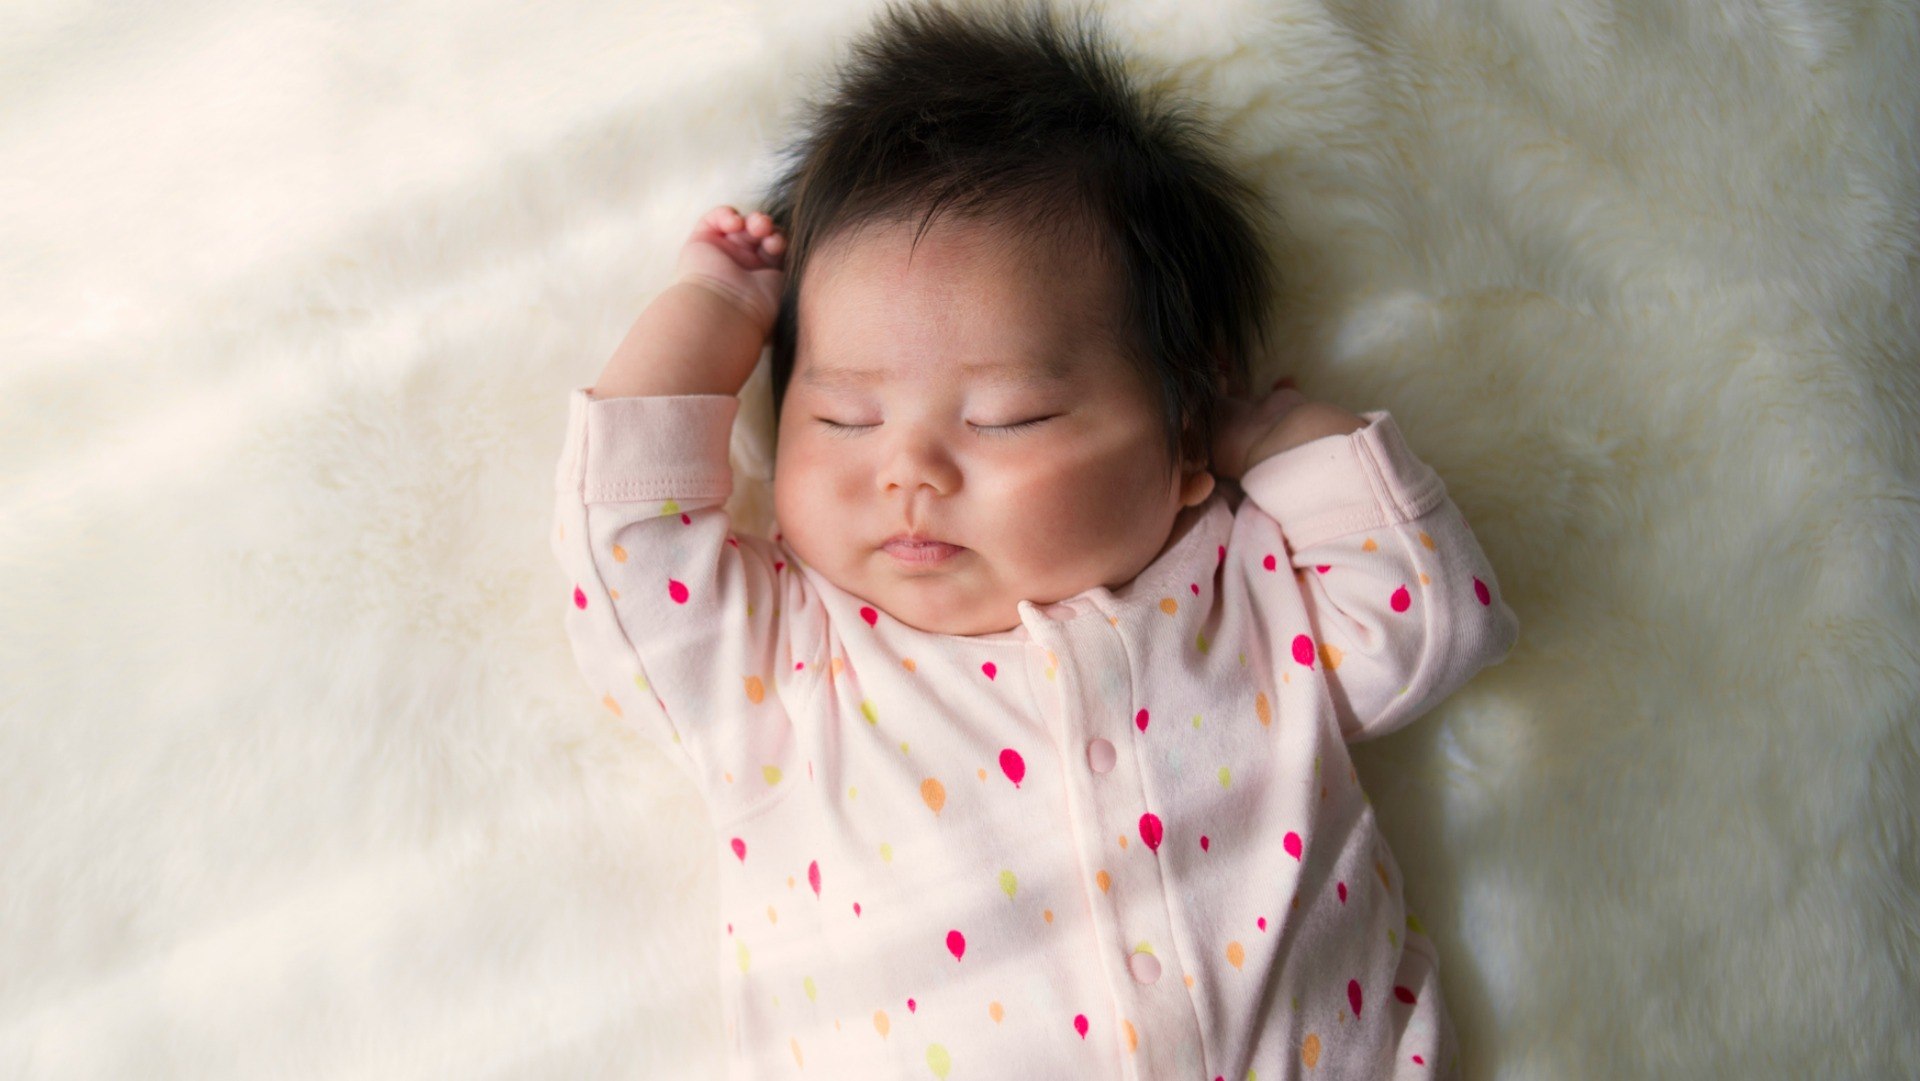 Baby Girl Names With Great Meanings You're Going to Love